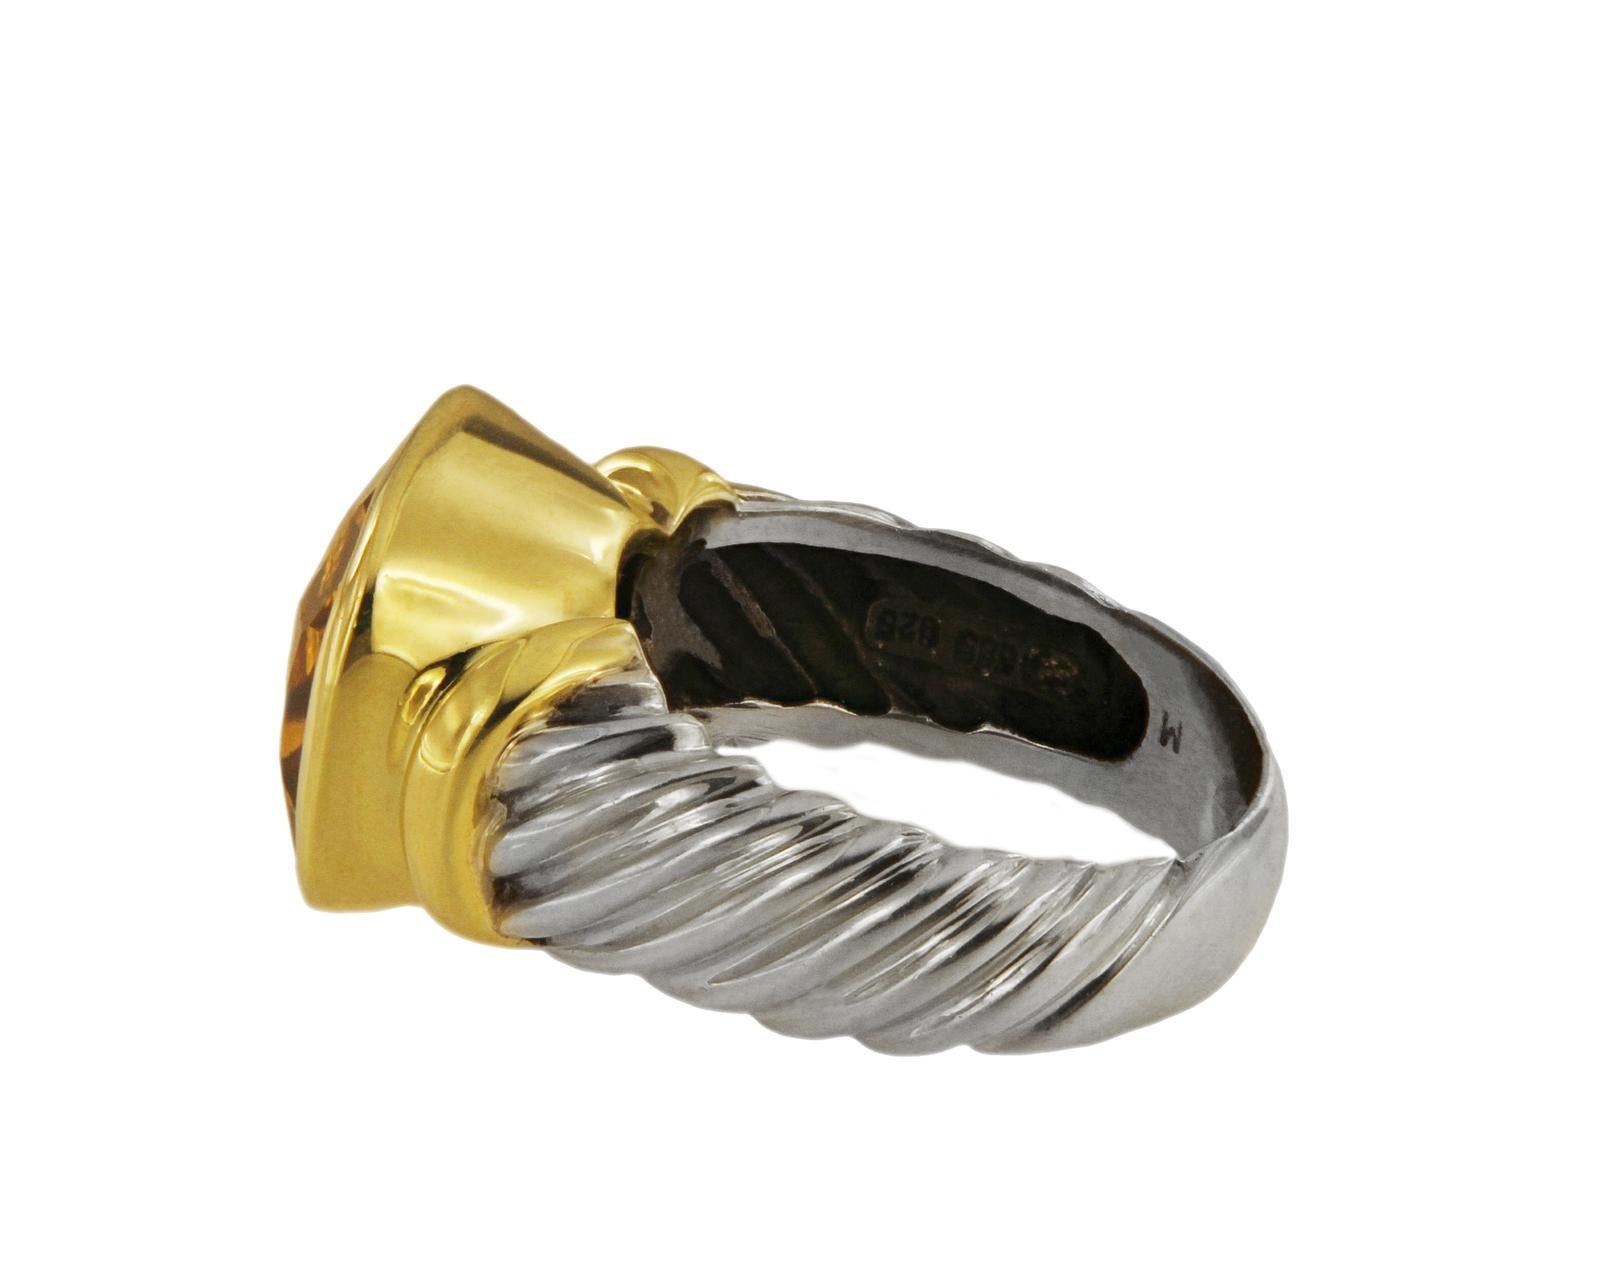 DAVID YURMAN CITRINE NOBLESSE GOLD & SILVER RING.

-Mint condition
-Sterling silver & 14k Yellow Gold
-Ring size: 8
-Citrine: 11x14mm

*Comes with David Yurman pouch.